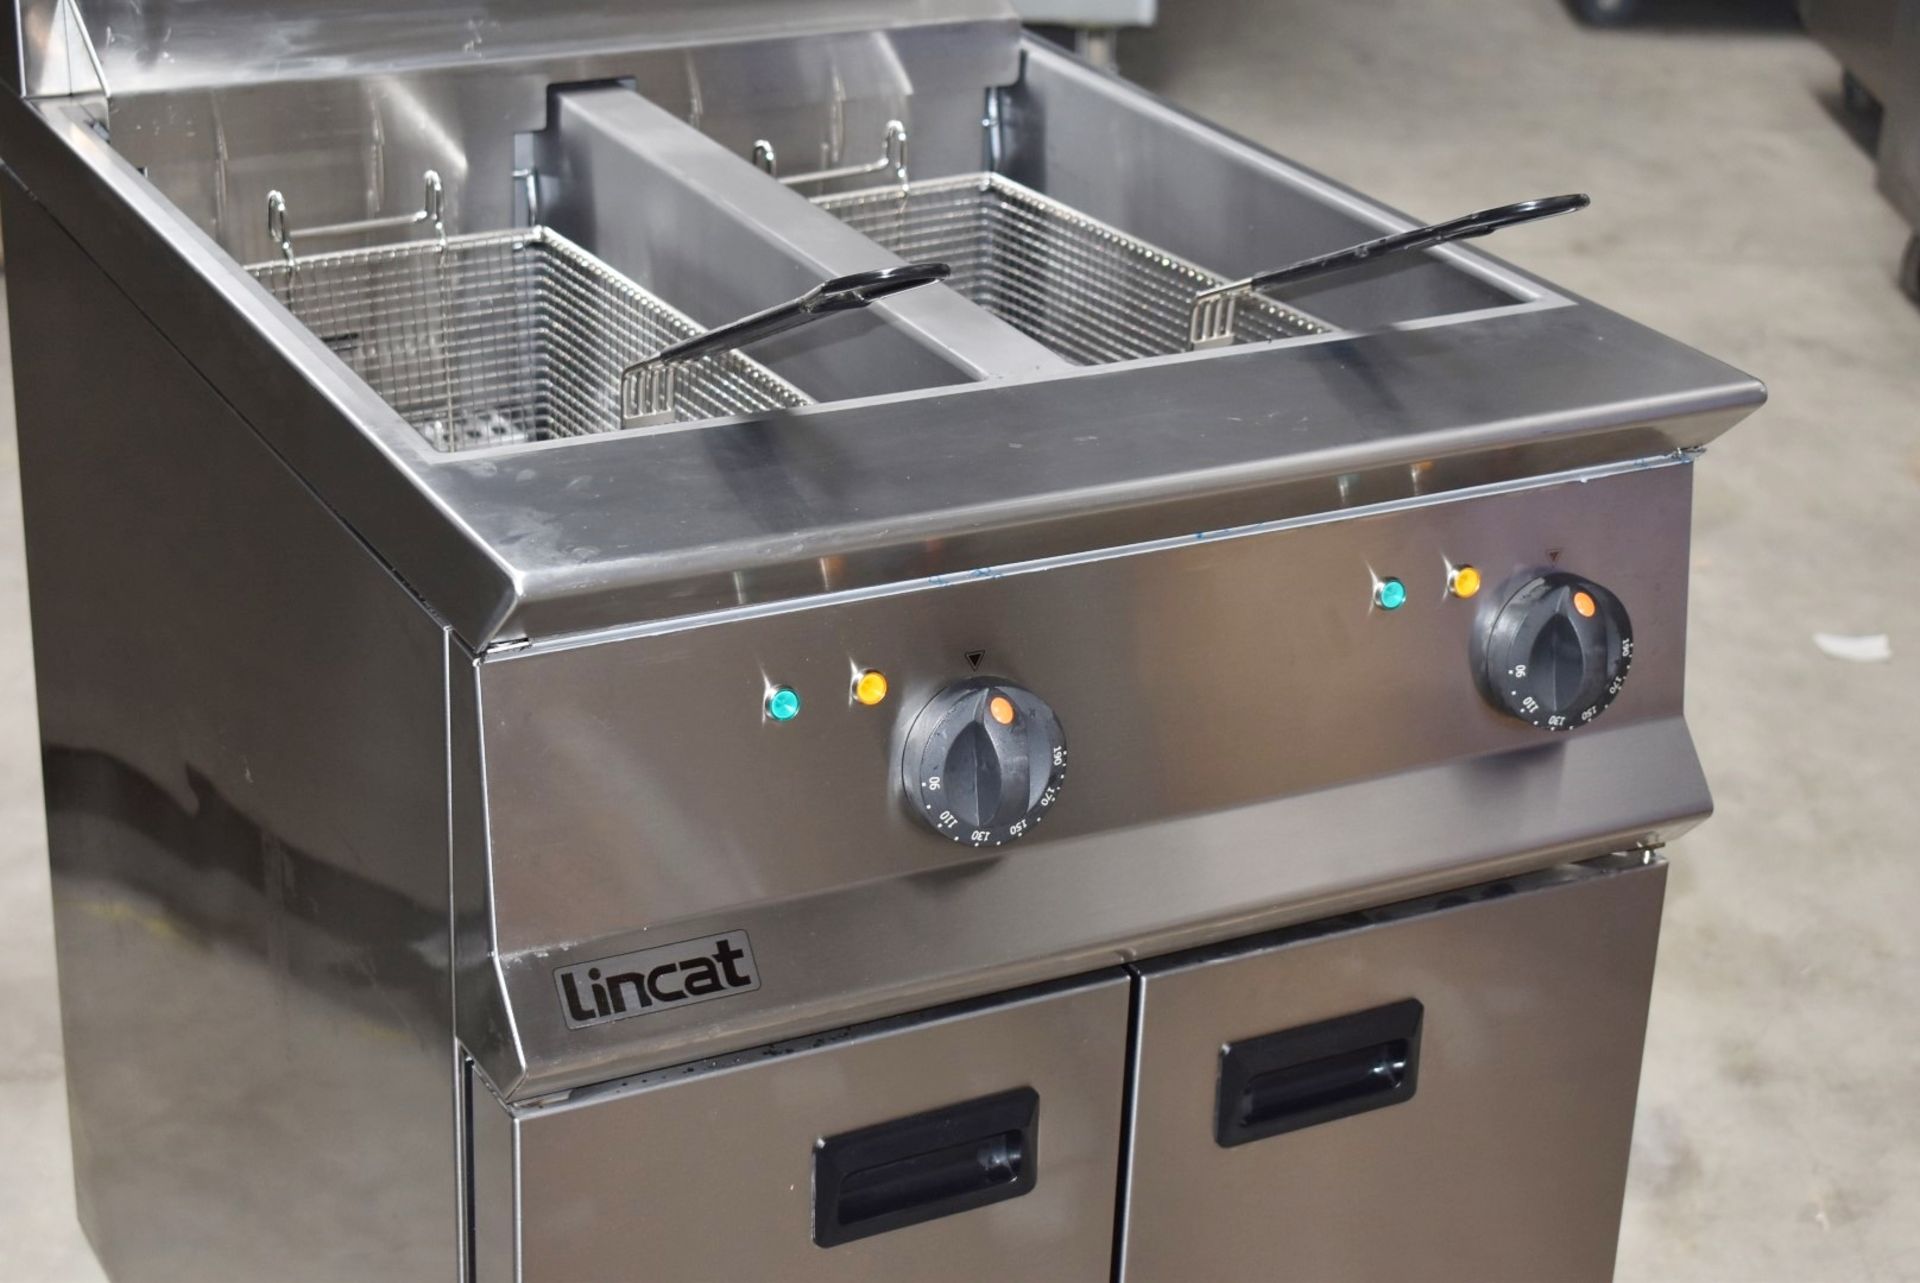 1 x Lincat Opus 800 Twin Tank Electric 3 Phase Fryer With Filtration and Two Baskets - Model - Image 7 of 24